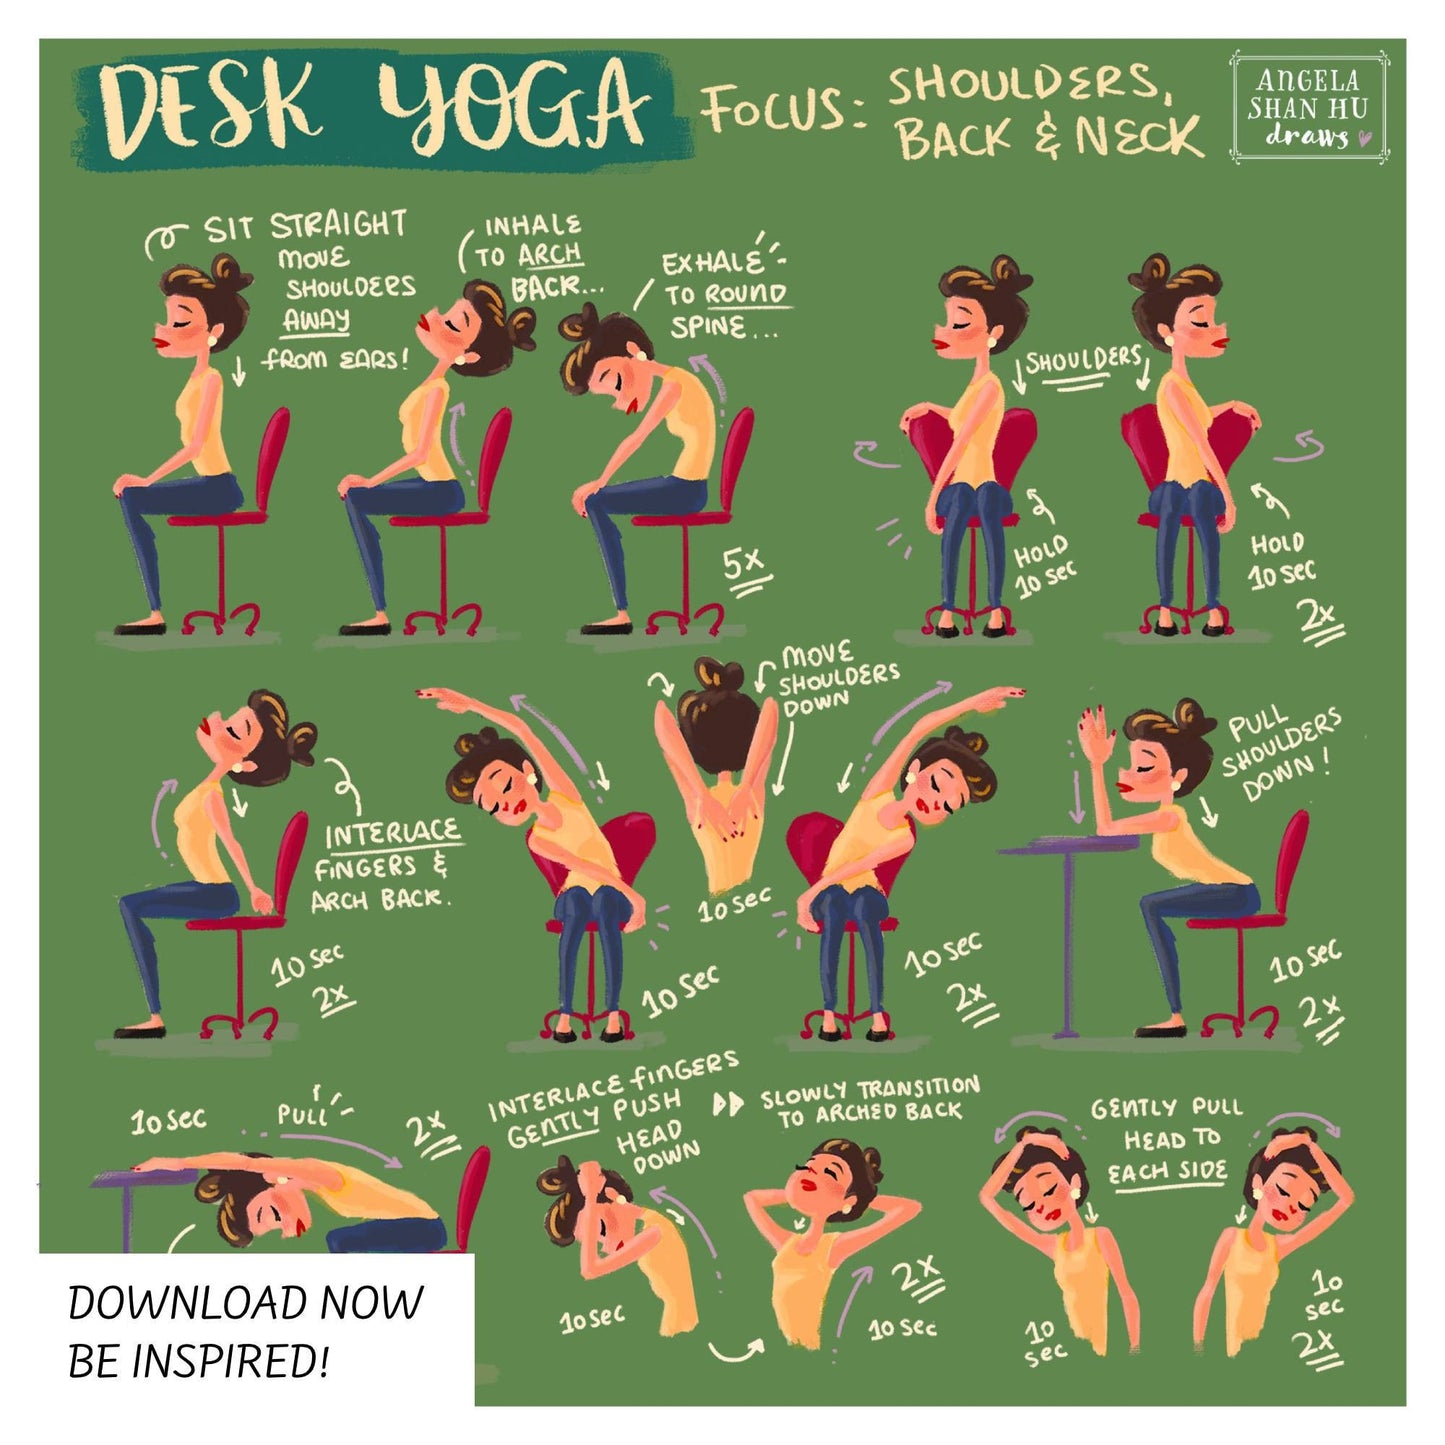 Desk Yoga - focus on shoulders, back and neck | Chair Yoga | Office Yoga | Yoga Poses | Work From Home Yoga | 8x8 in, 8x10 in, 16x16 in